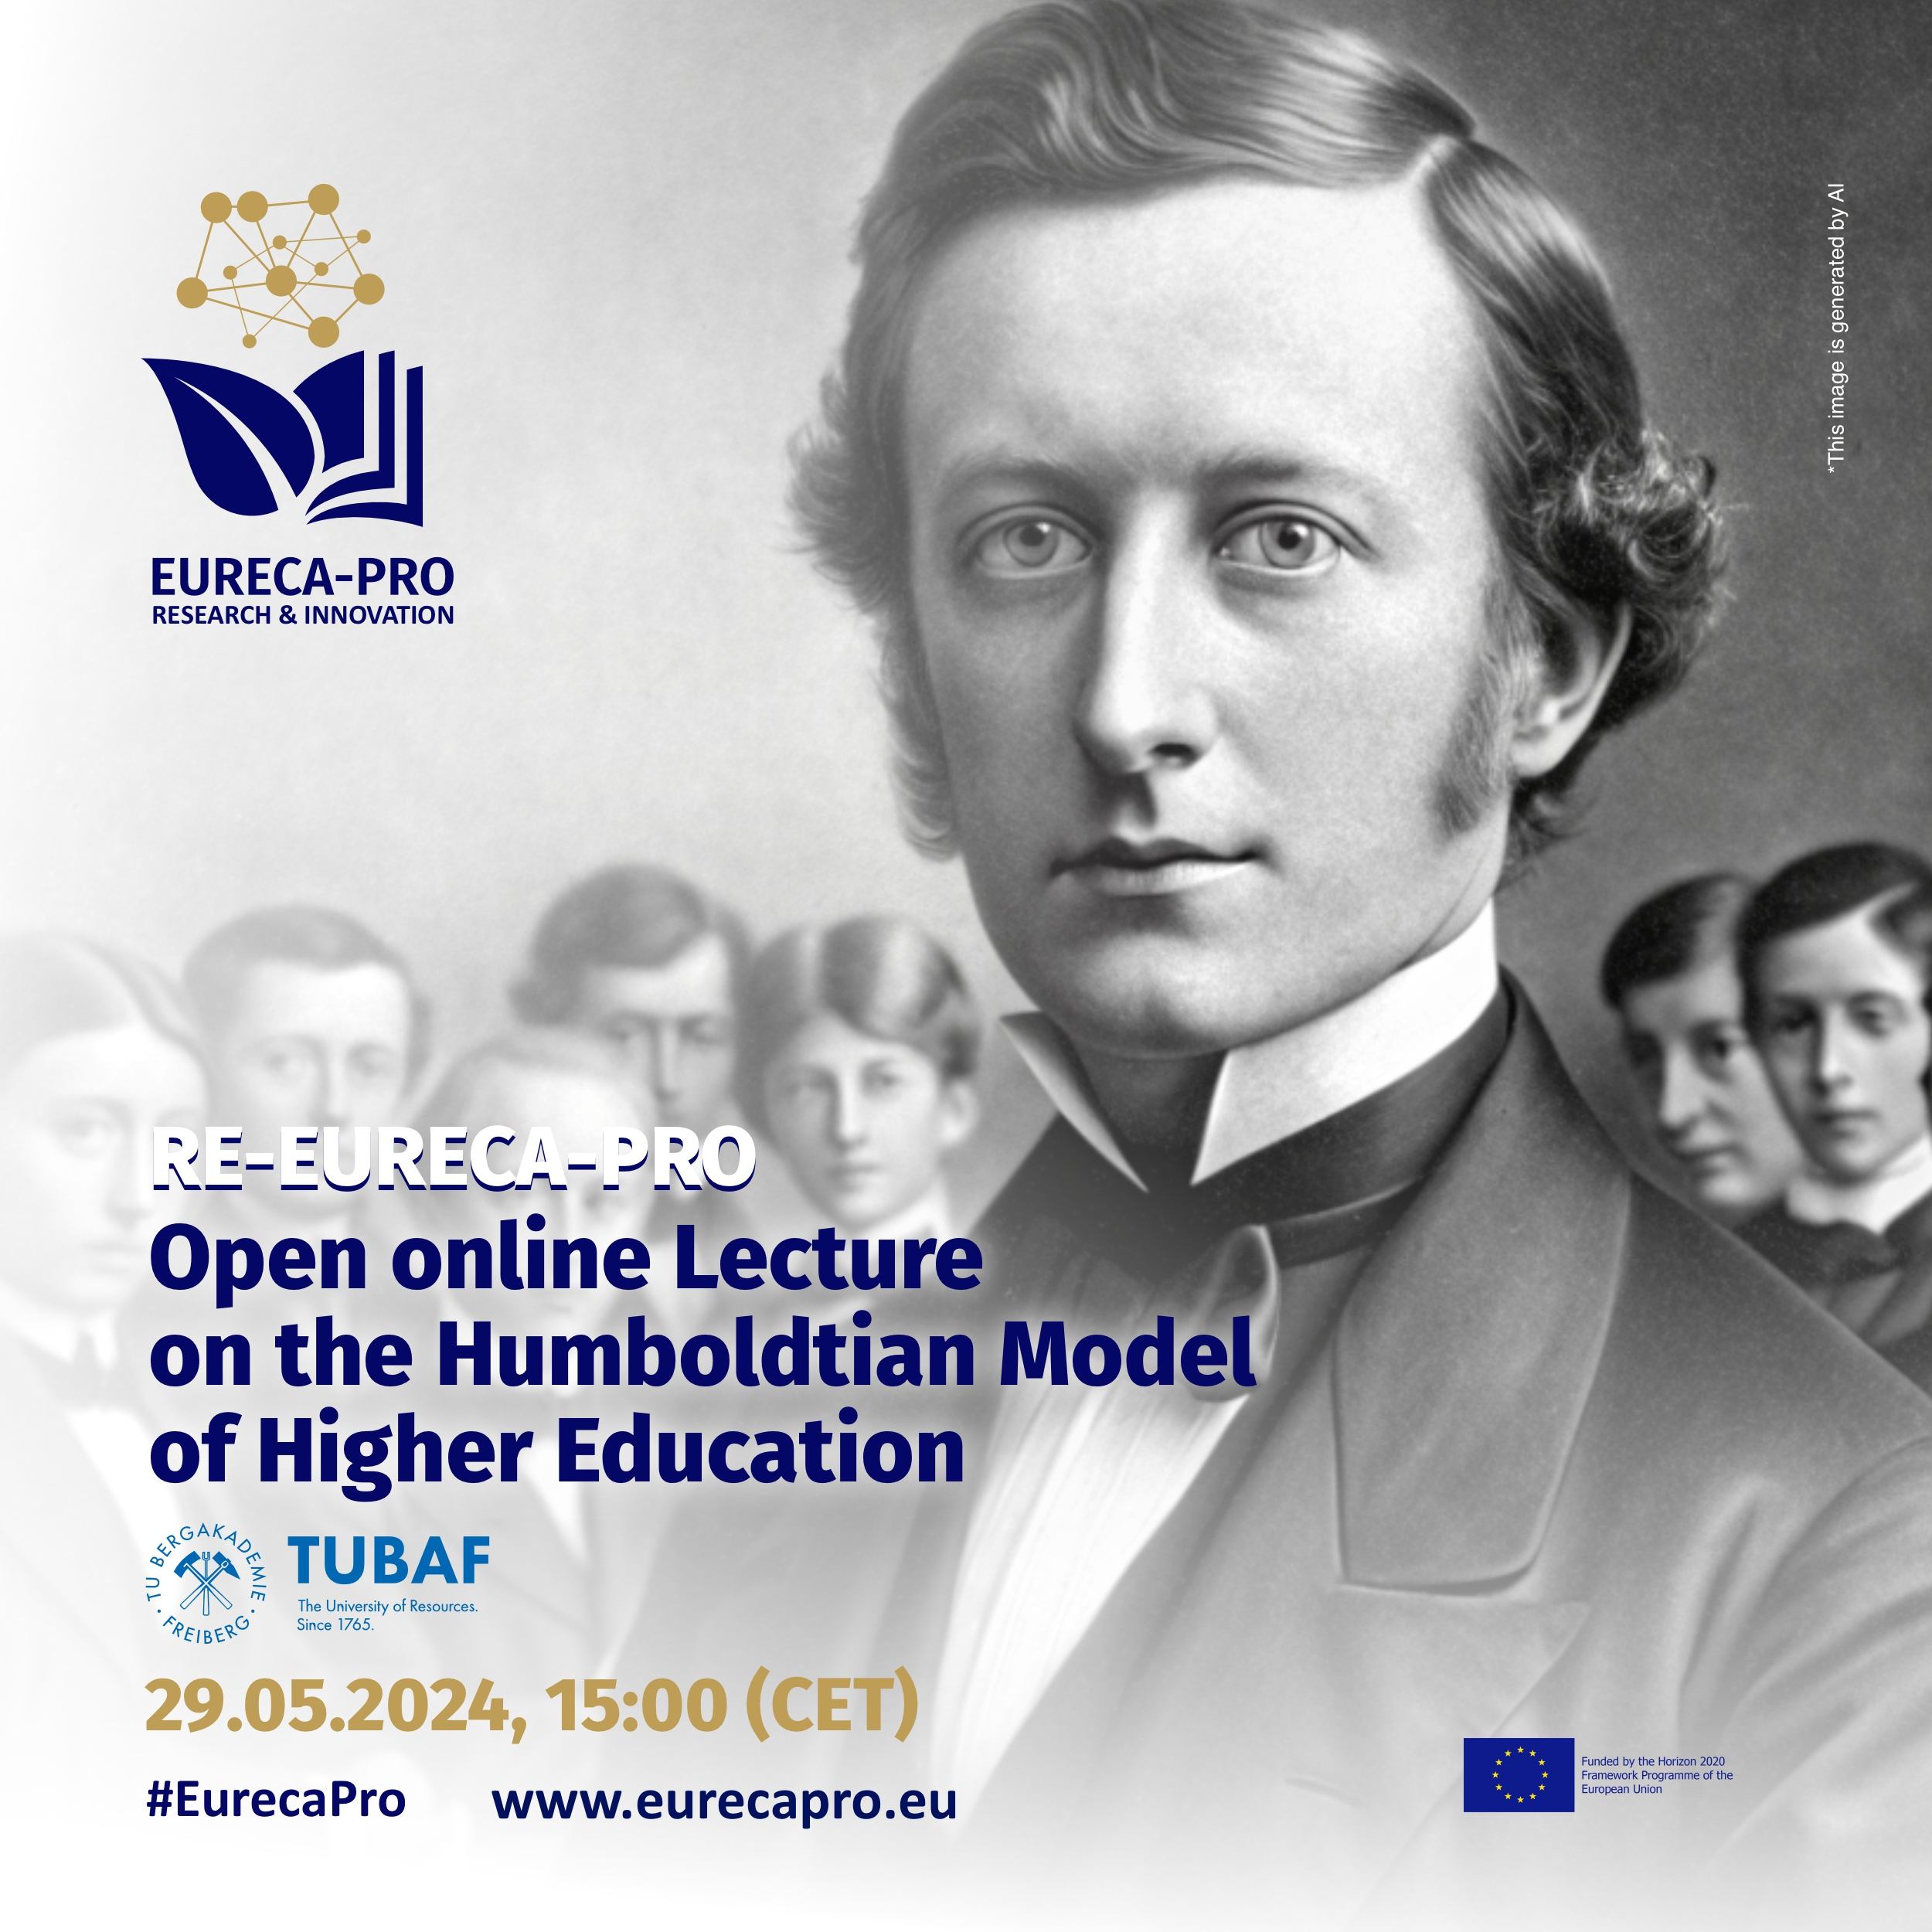 RE-EURECA-PRO Lecture on the Humboldtian Model of Higher Education |Banner